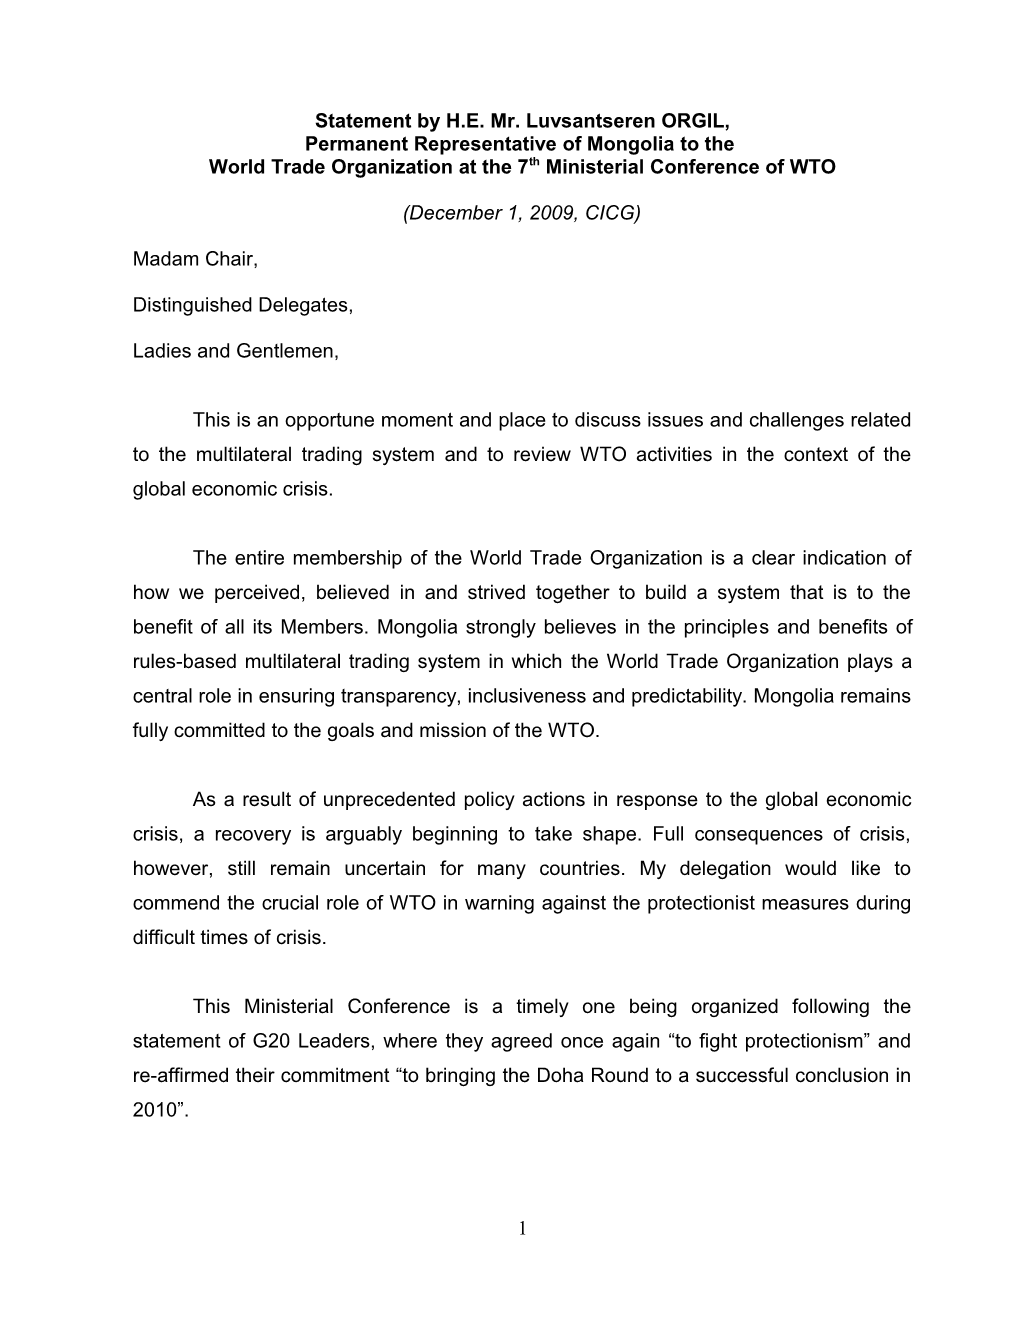 Statement by Minister for Foreign Affairs and Trade of Mongolia